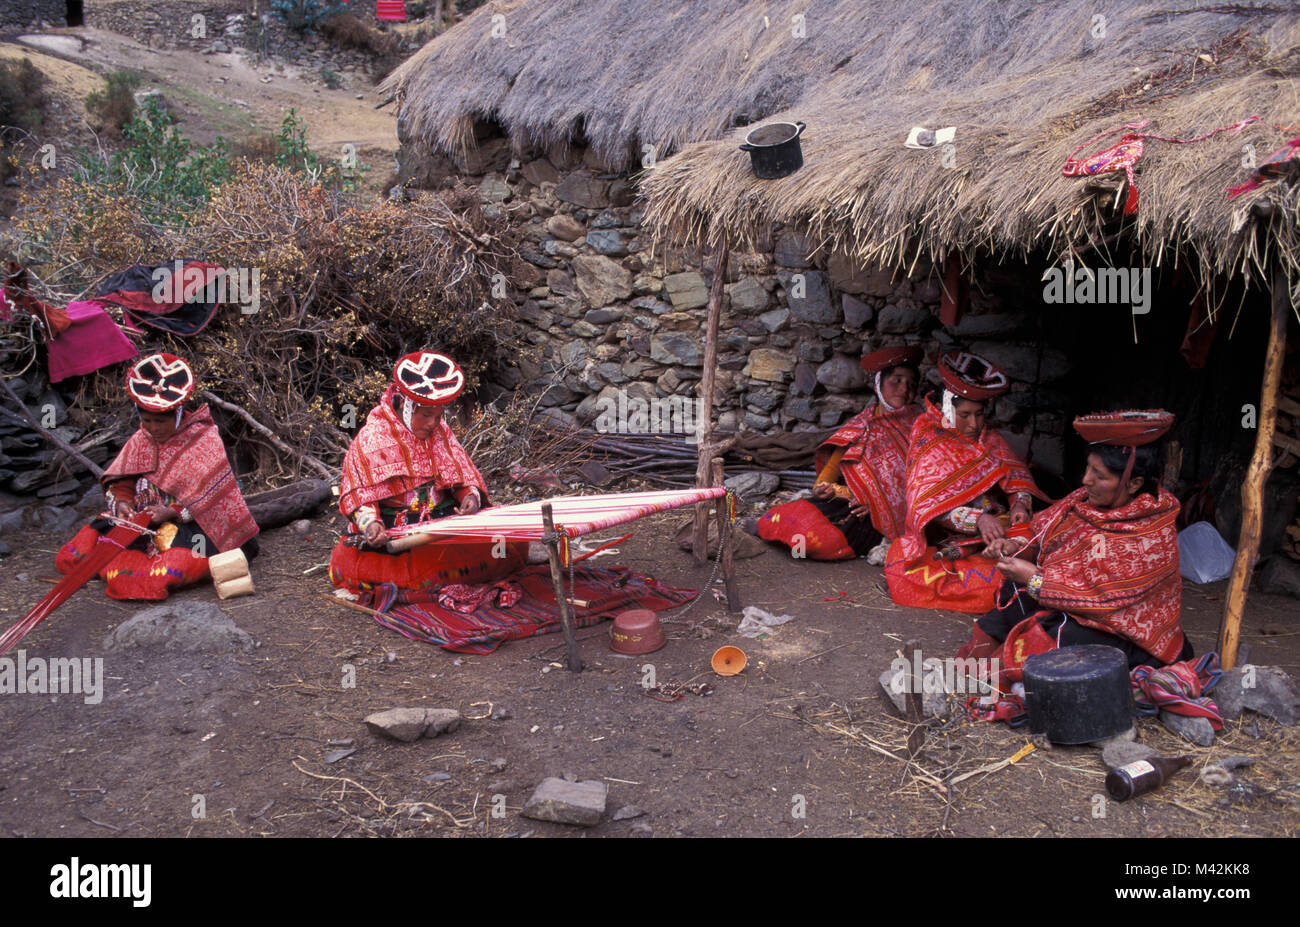 Peru. Huilloc or Willoc. Near Ollantaytambo and Cusco, Cuzco, Women weaving in traditional clothing on countryside. Stock Photo